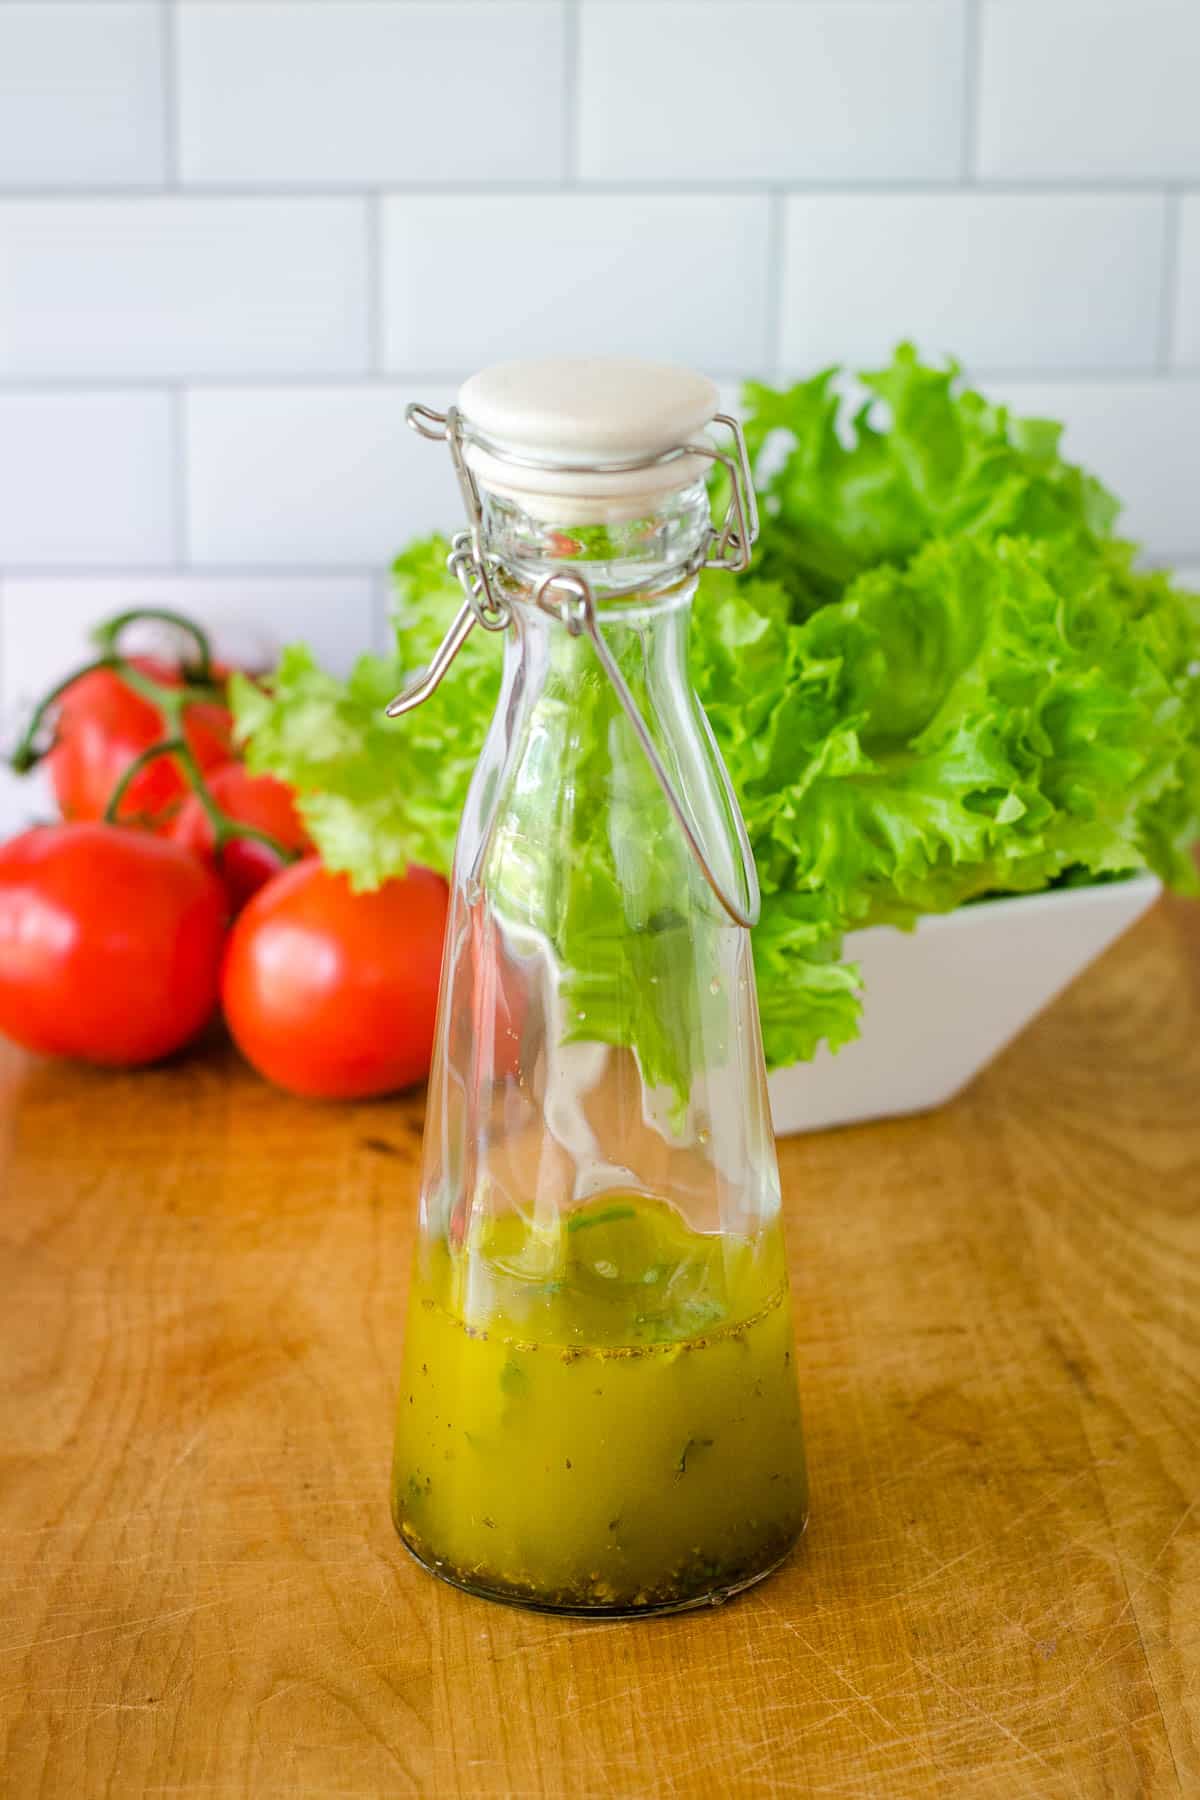 Homemade Italian dressing in glass botte in front of tomatoes and lettuce